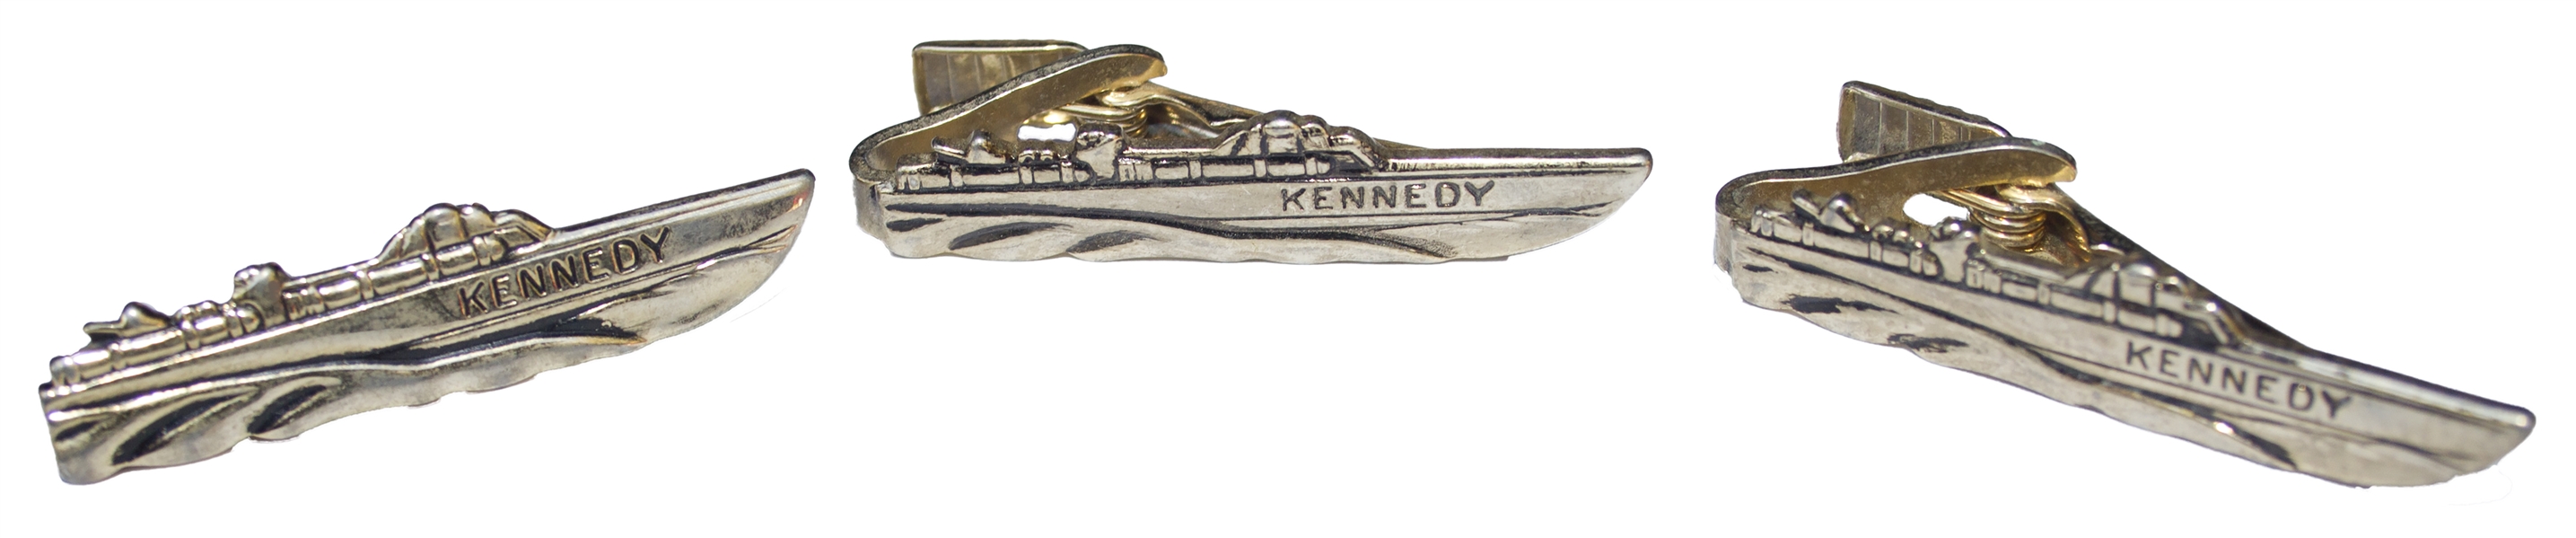 Lot of Three PT-109 Tie Bars From JFK's 1960 Presidential Campaign -- Direct From the Kennedy Family